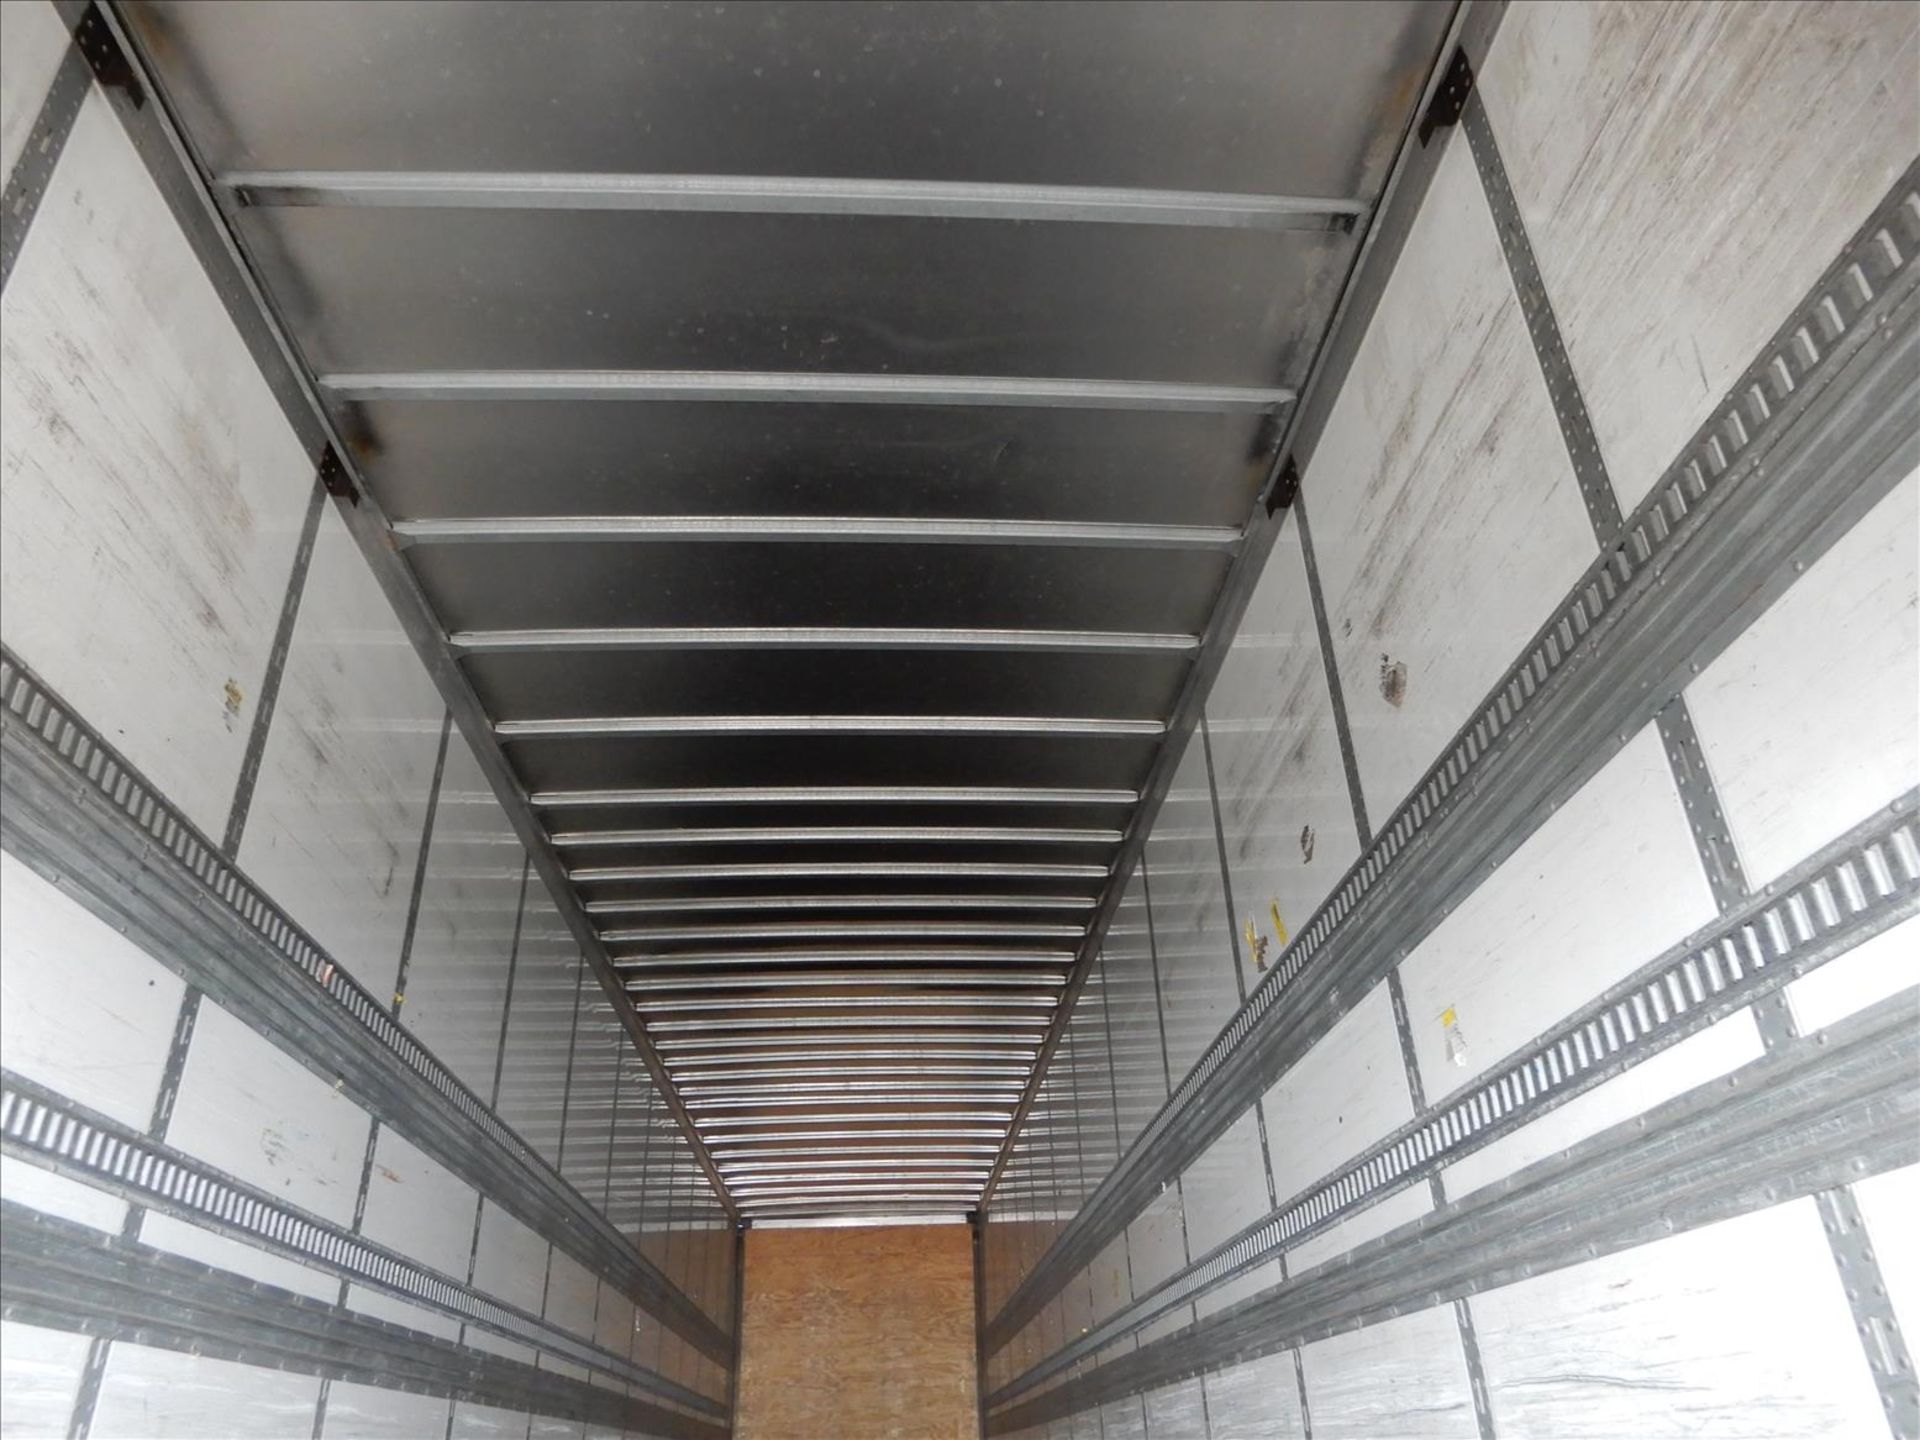 2012 Stoughton Trailer - Located in Indianapolis, IN - Image 27 of 31